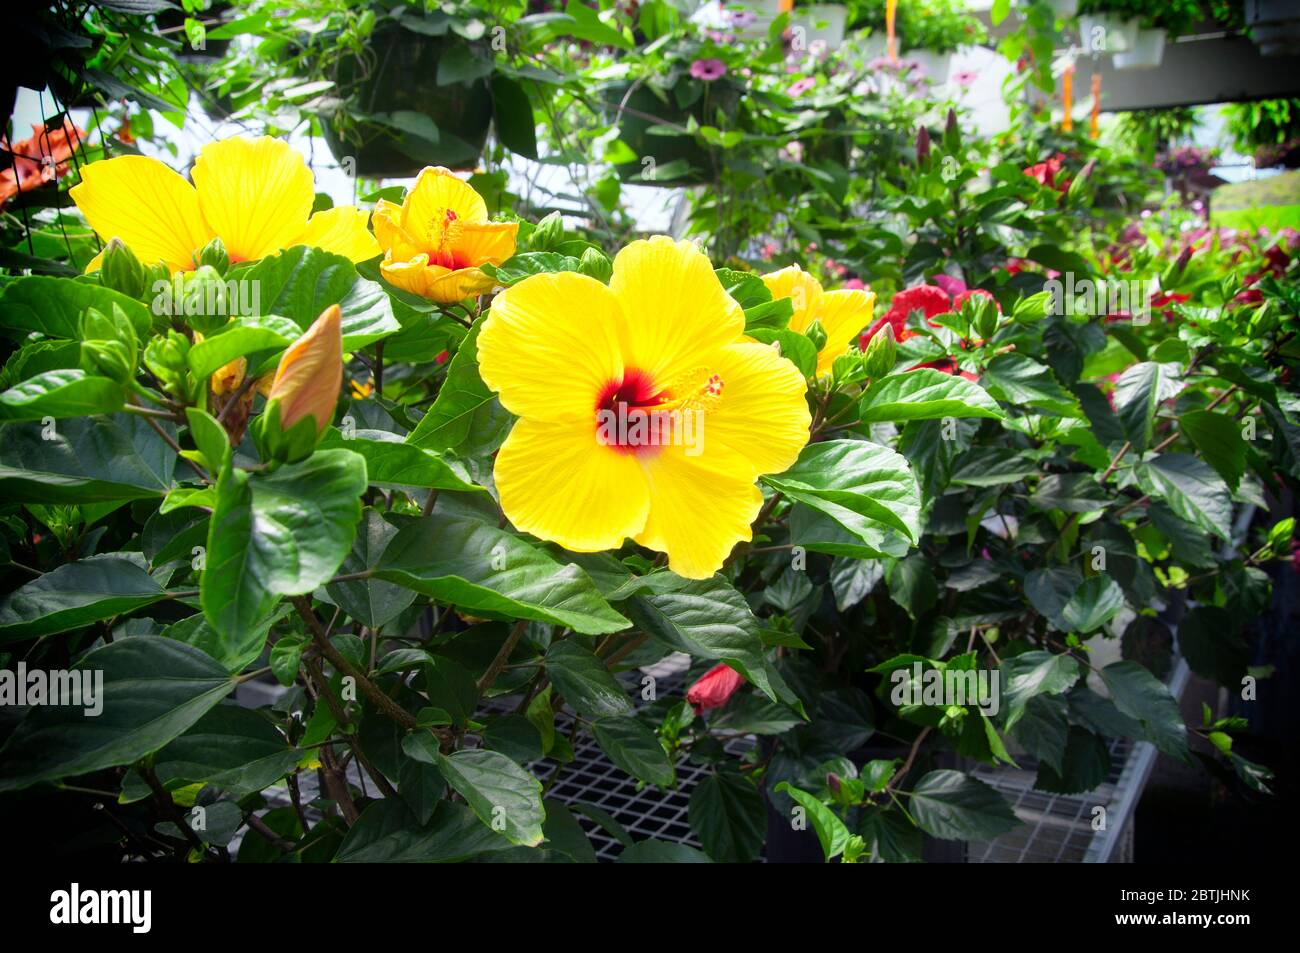 A sunset variety of a blooming hibiscus flower against a green background in a greenhouse. Stock Photo